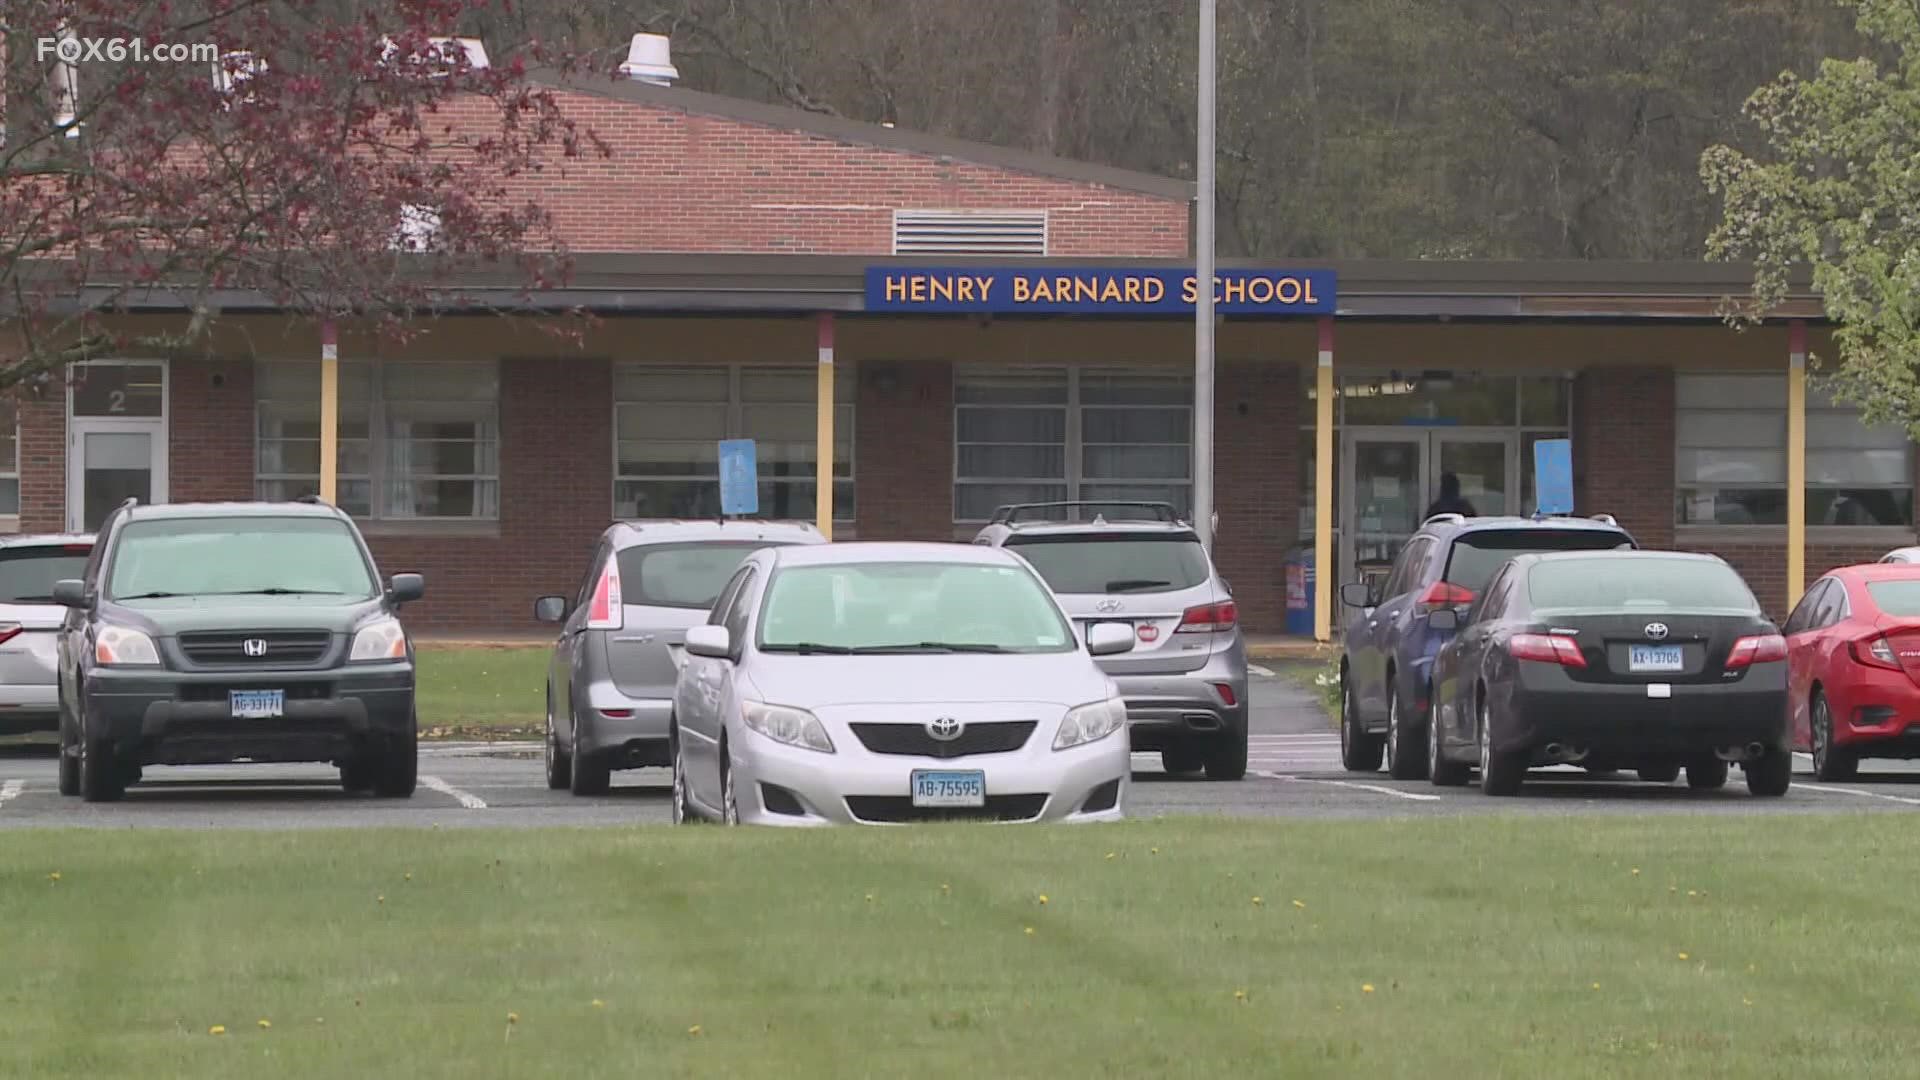 40 of 75 staffers at Henry Barnard Middle School tested positive for COVID